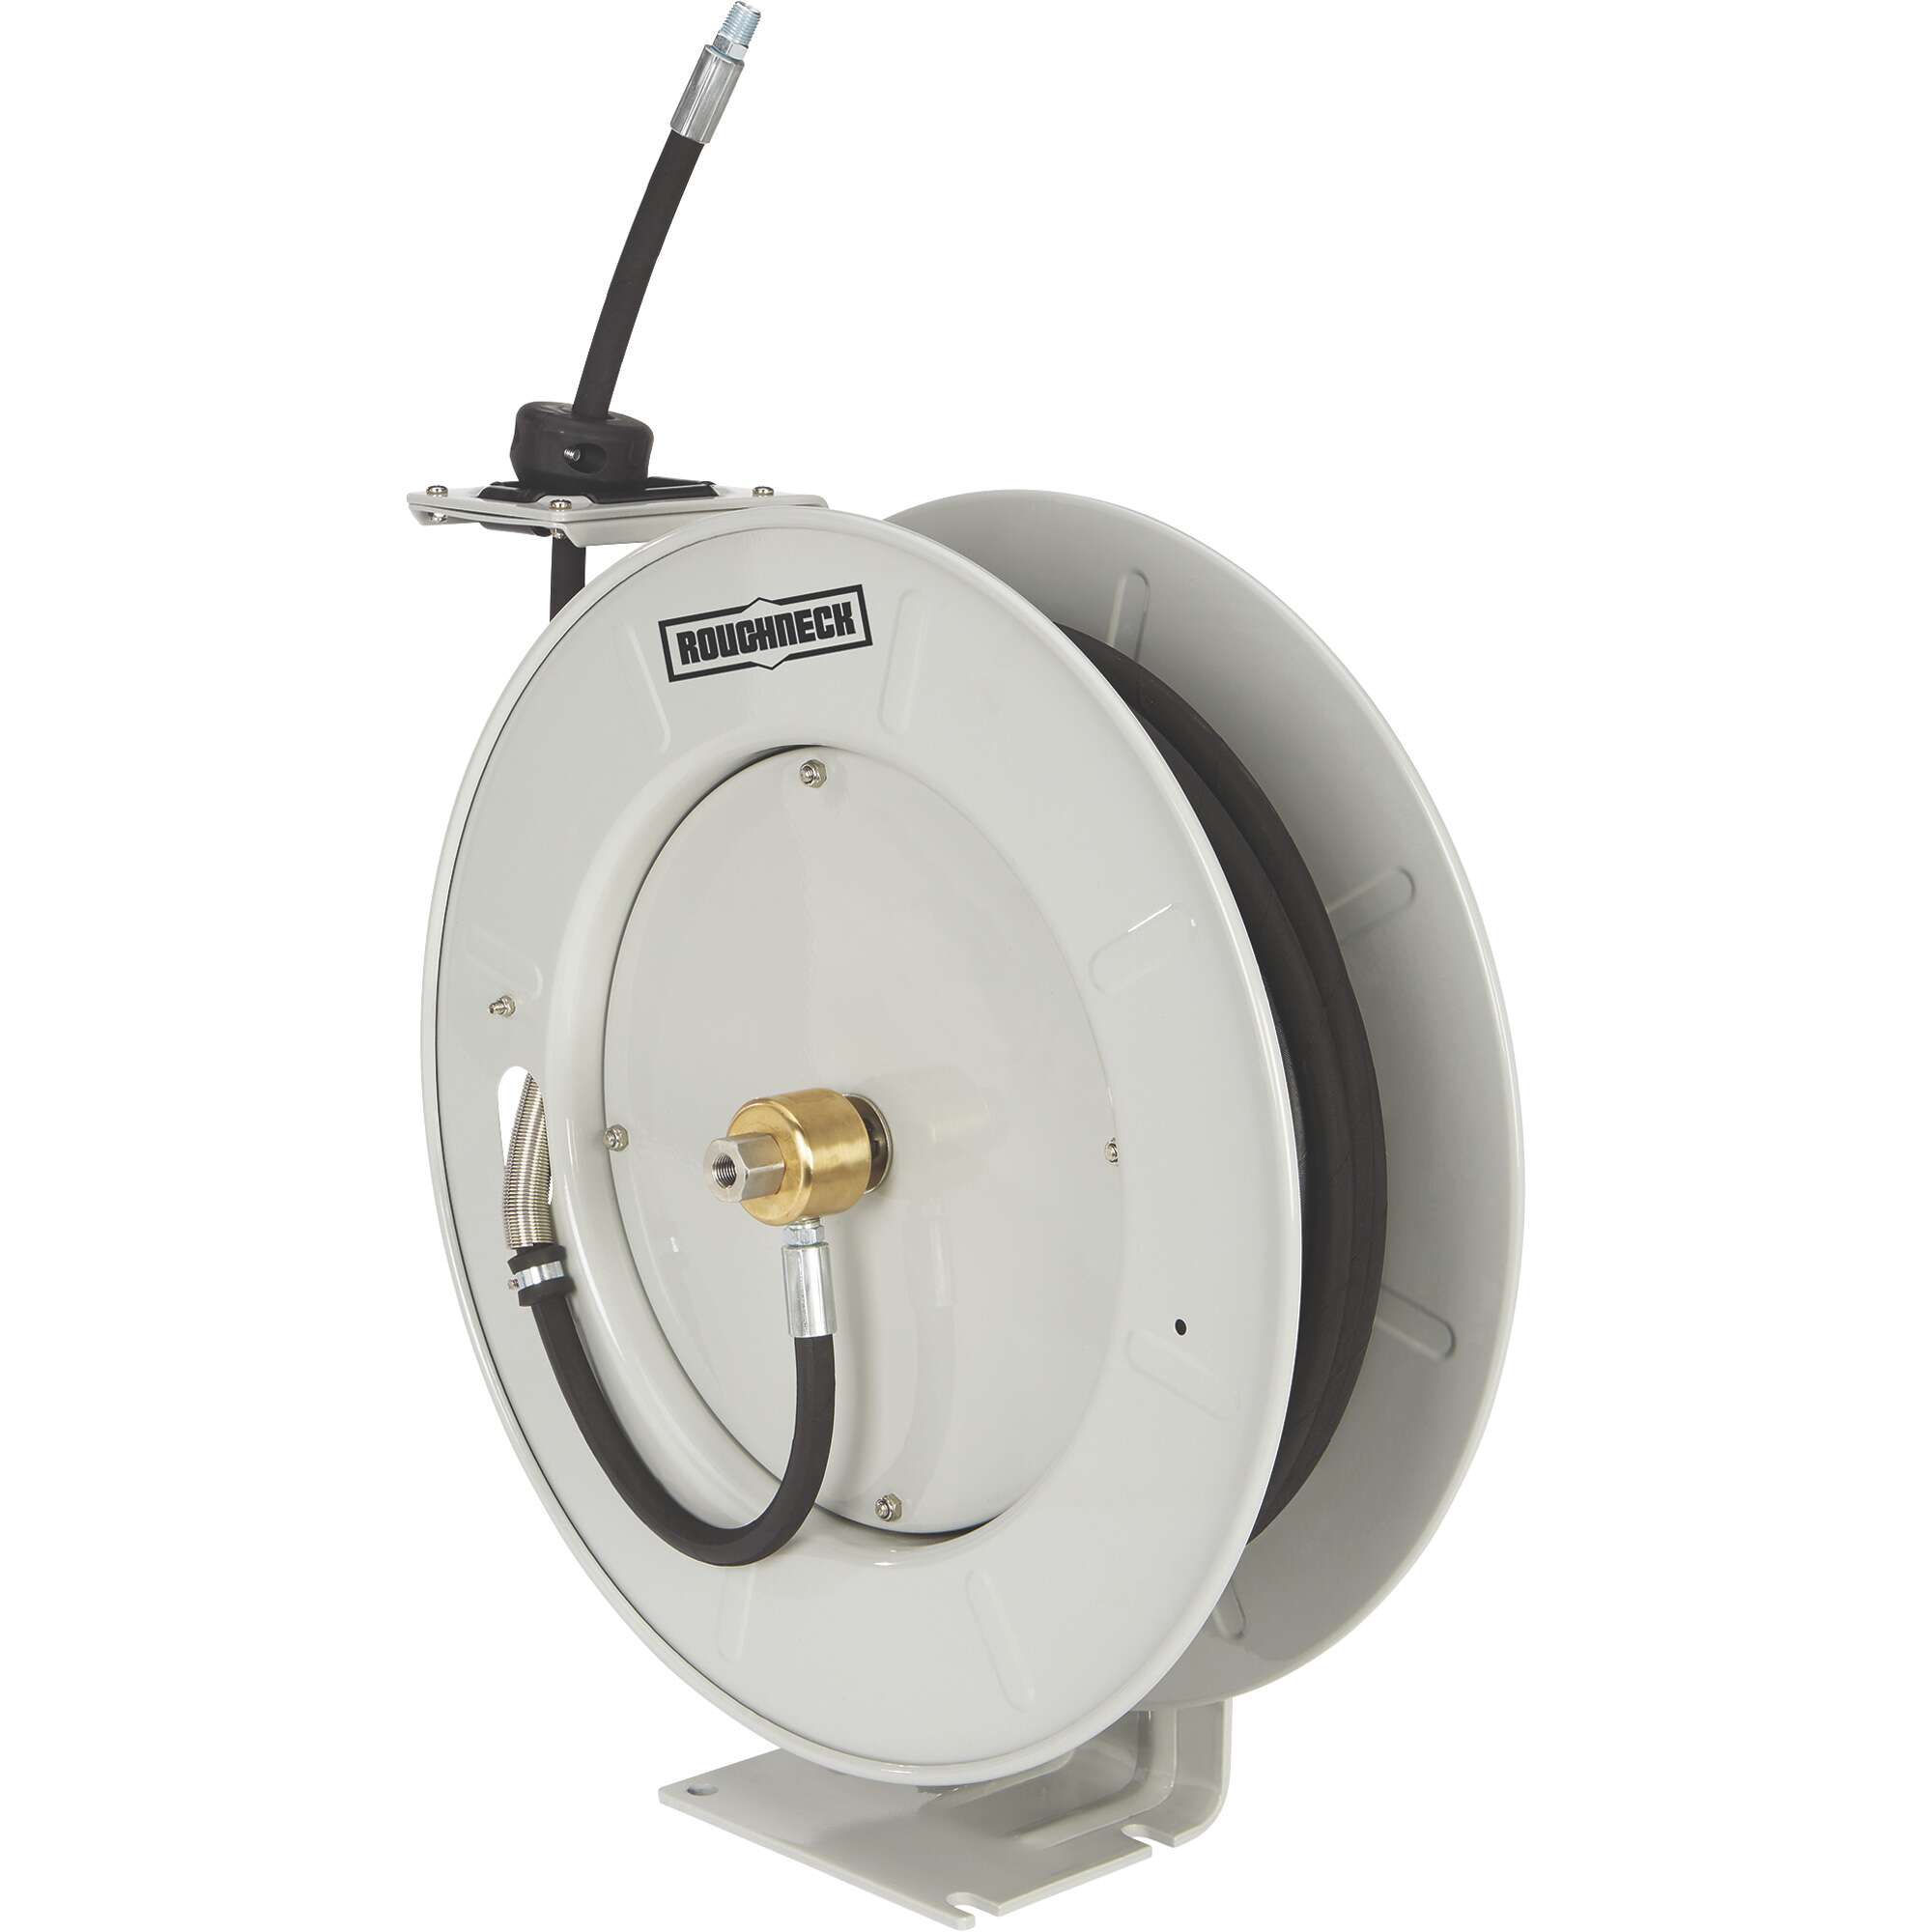 Roughneck Dual Grease/Oil Hose Reel with 50ft. Hoses, 1/4in. x